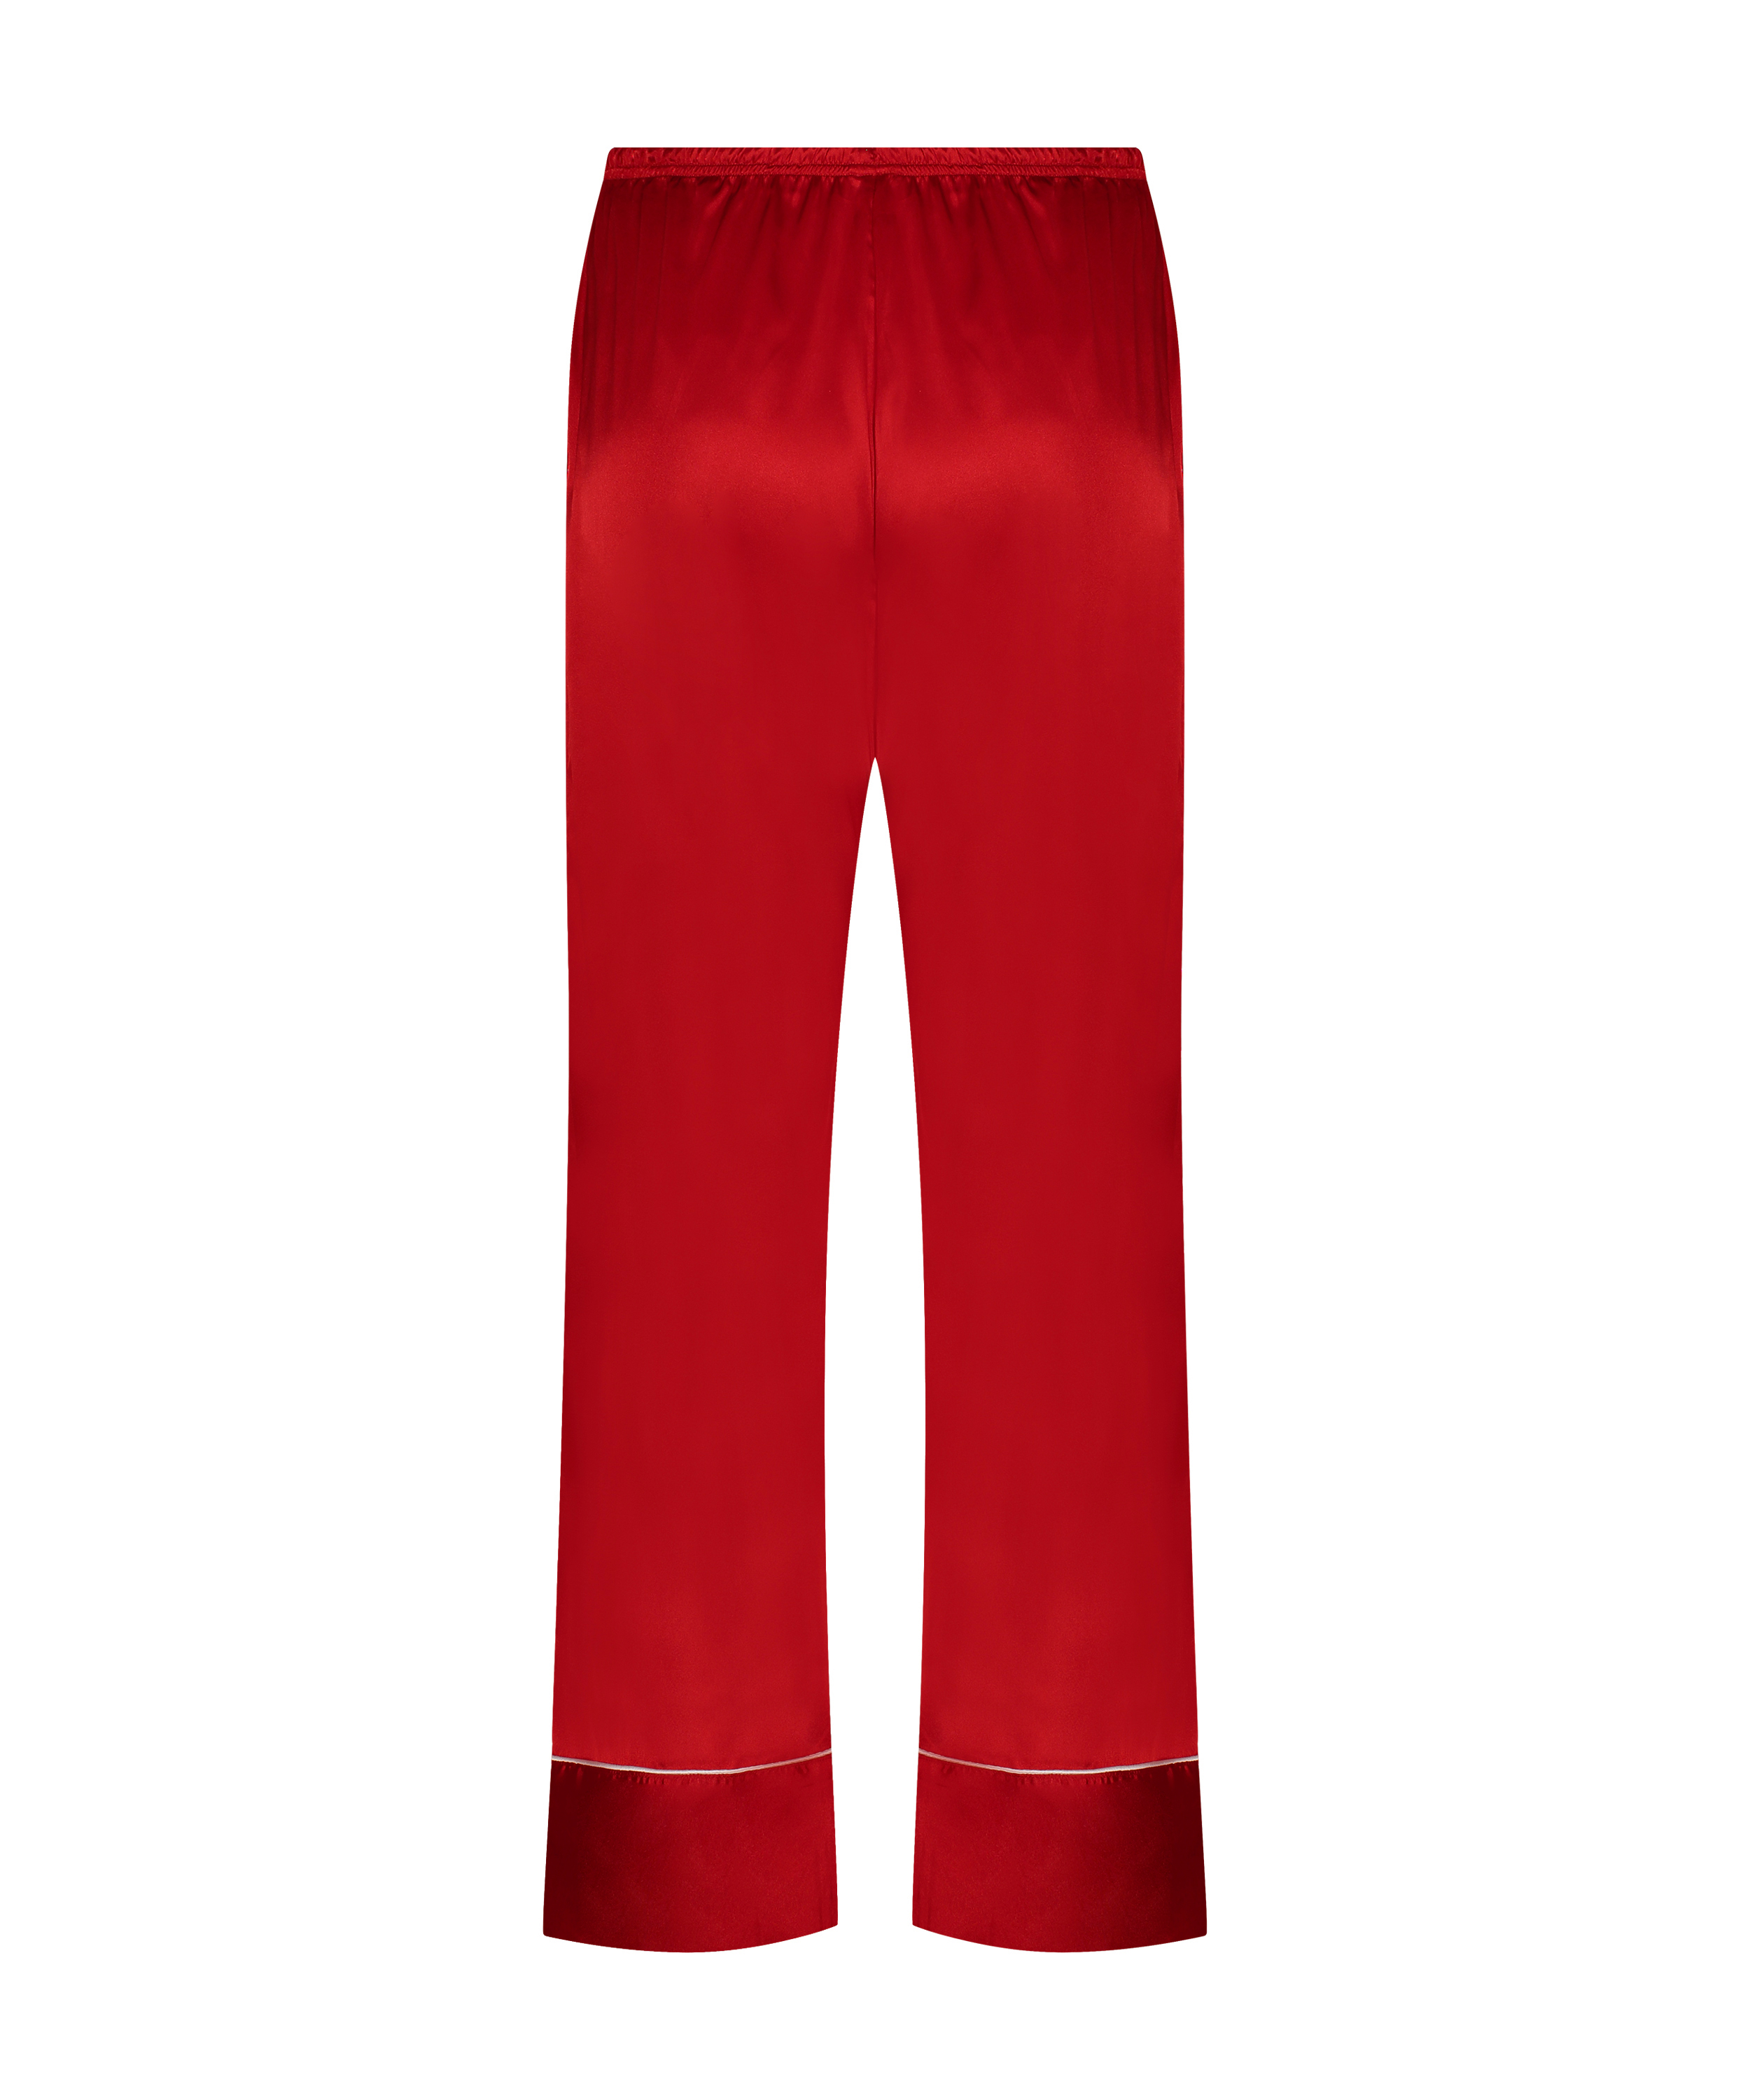 Satin Trousers, Red, main